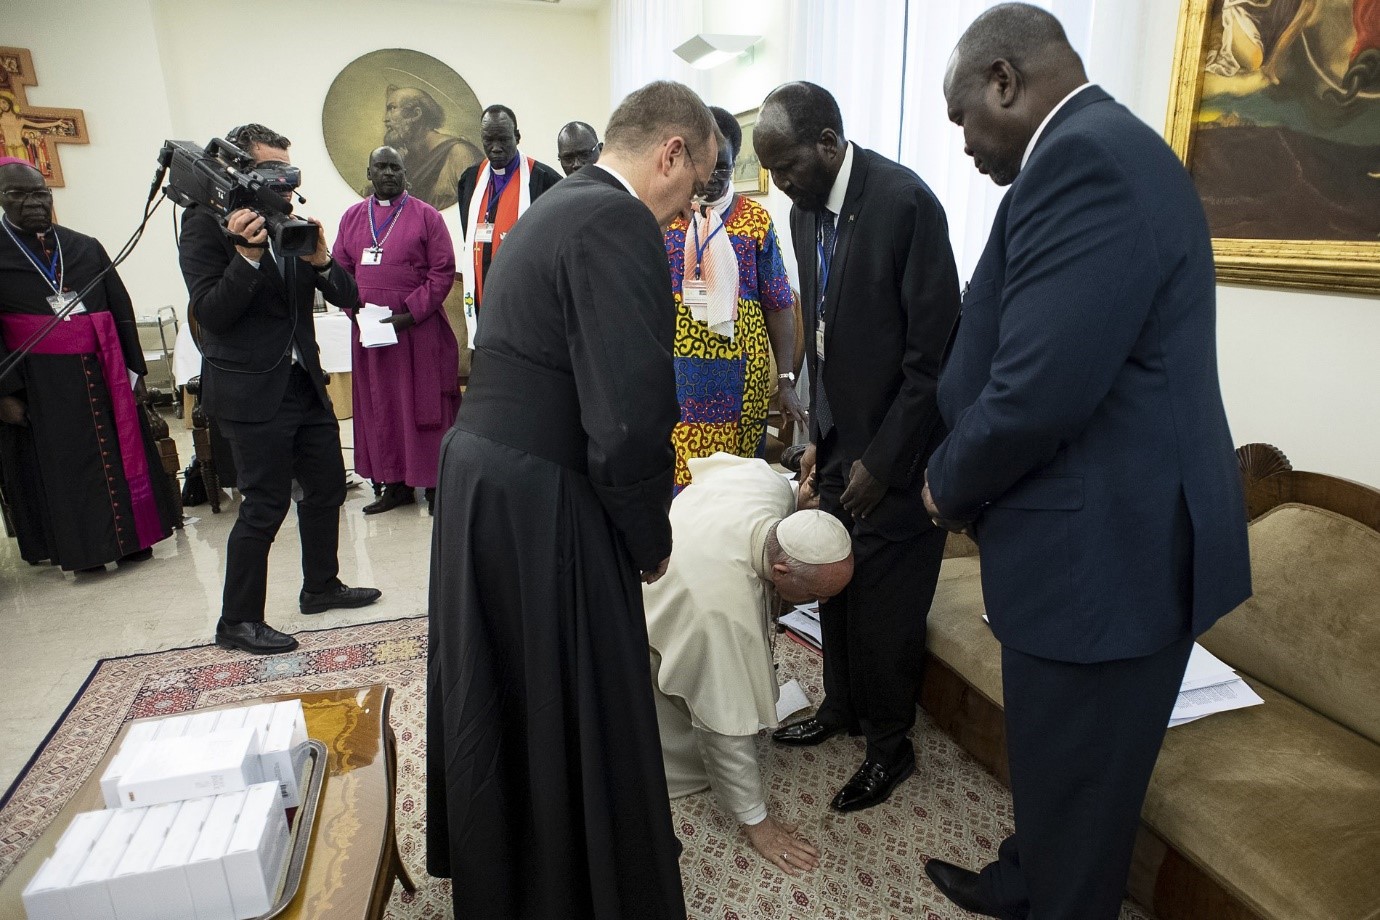 “Pray for South Sudan” – Archbishop Welby says ahead of Pope’s visit to Juba